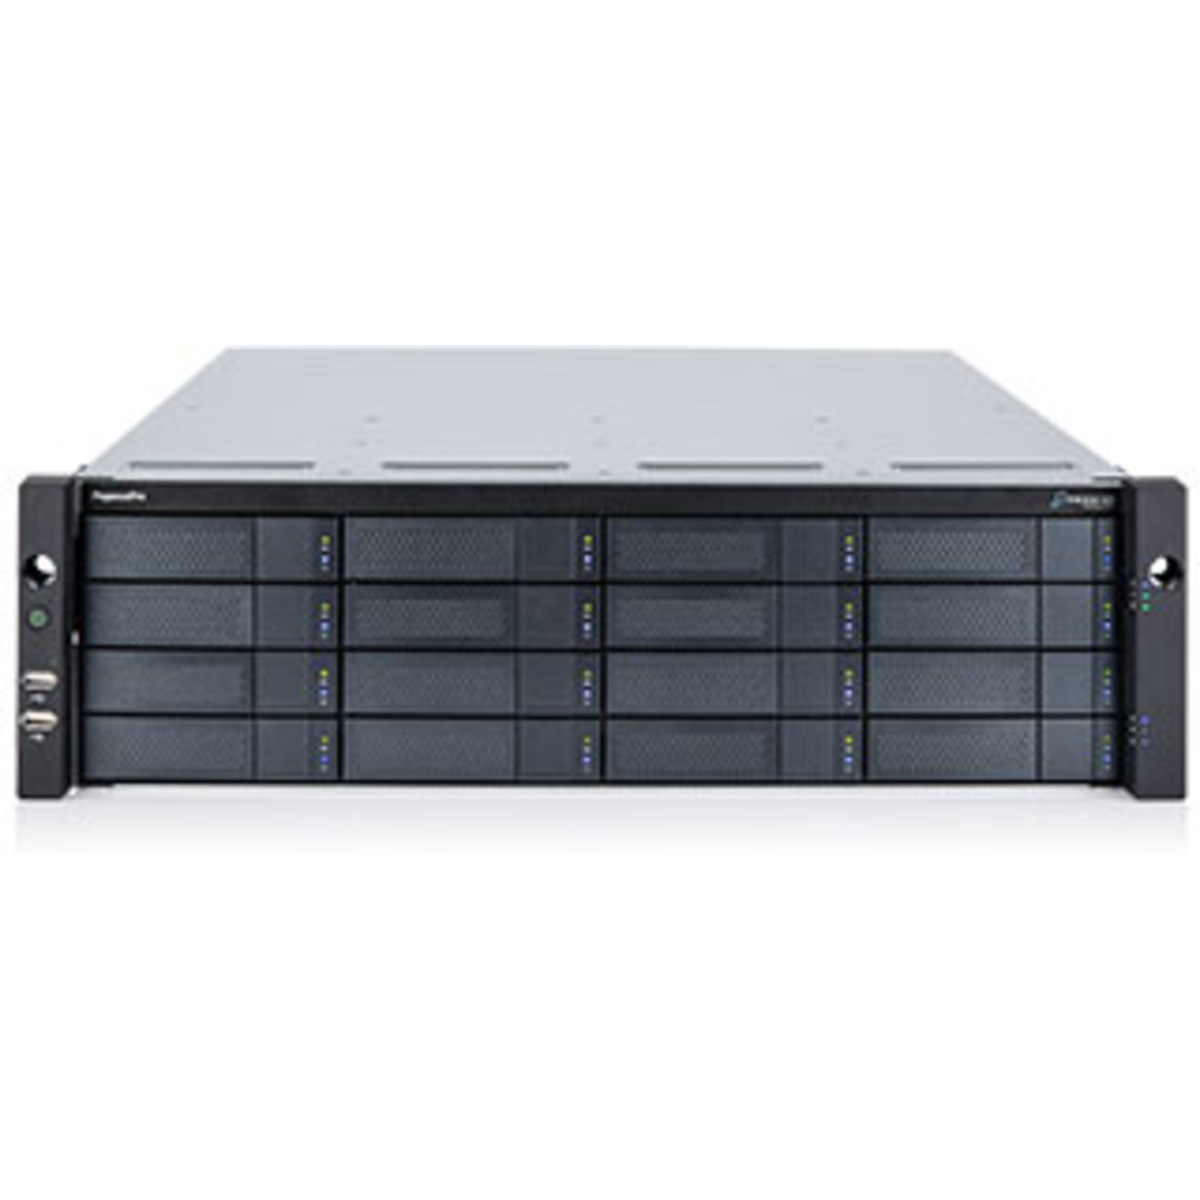 Promise Technology PegasusPro R16 270tb 16-Bay RackMount Multimedia / Power User / Business DAS-NAS - Combo Direct + Network Storage Device 15x18tb Seagate IronWolf Pro ST18000NT001 3.5 7200rpm SATA 6Gb/s HDD NAS Class Drives Installed - Burn-In Tested PegasusPro R16